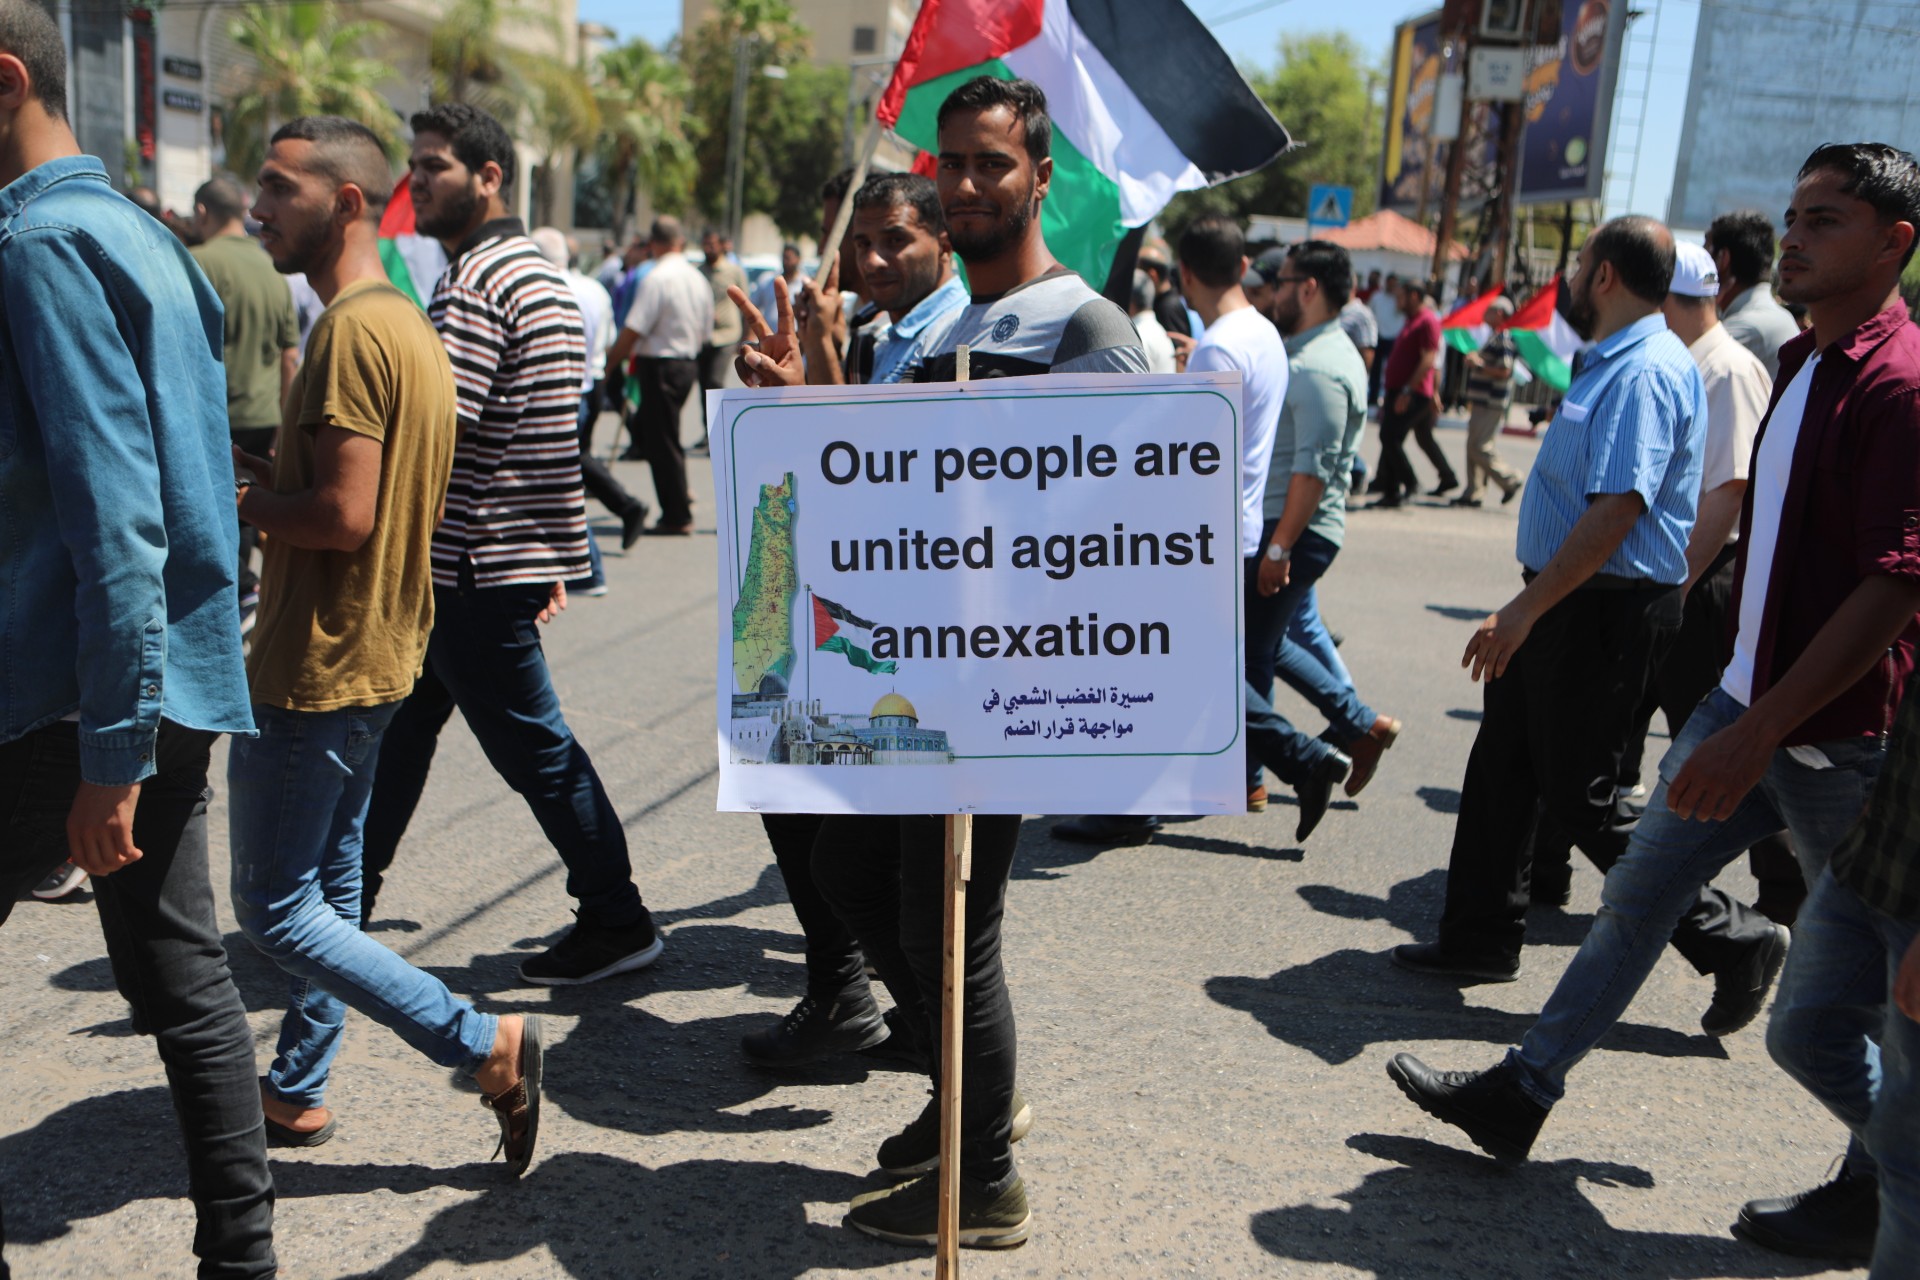 A Palestinian carrying a placard during a protest against Israeli annexation in the Gaza City on 1 July 2020 (MEE/Mohammed Hajjar)